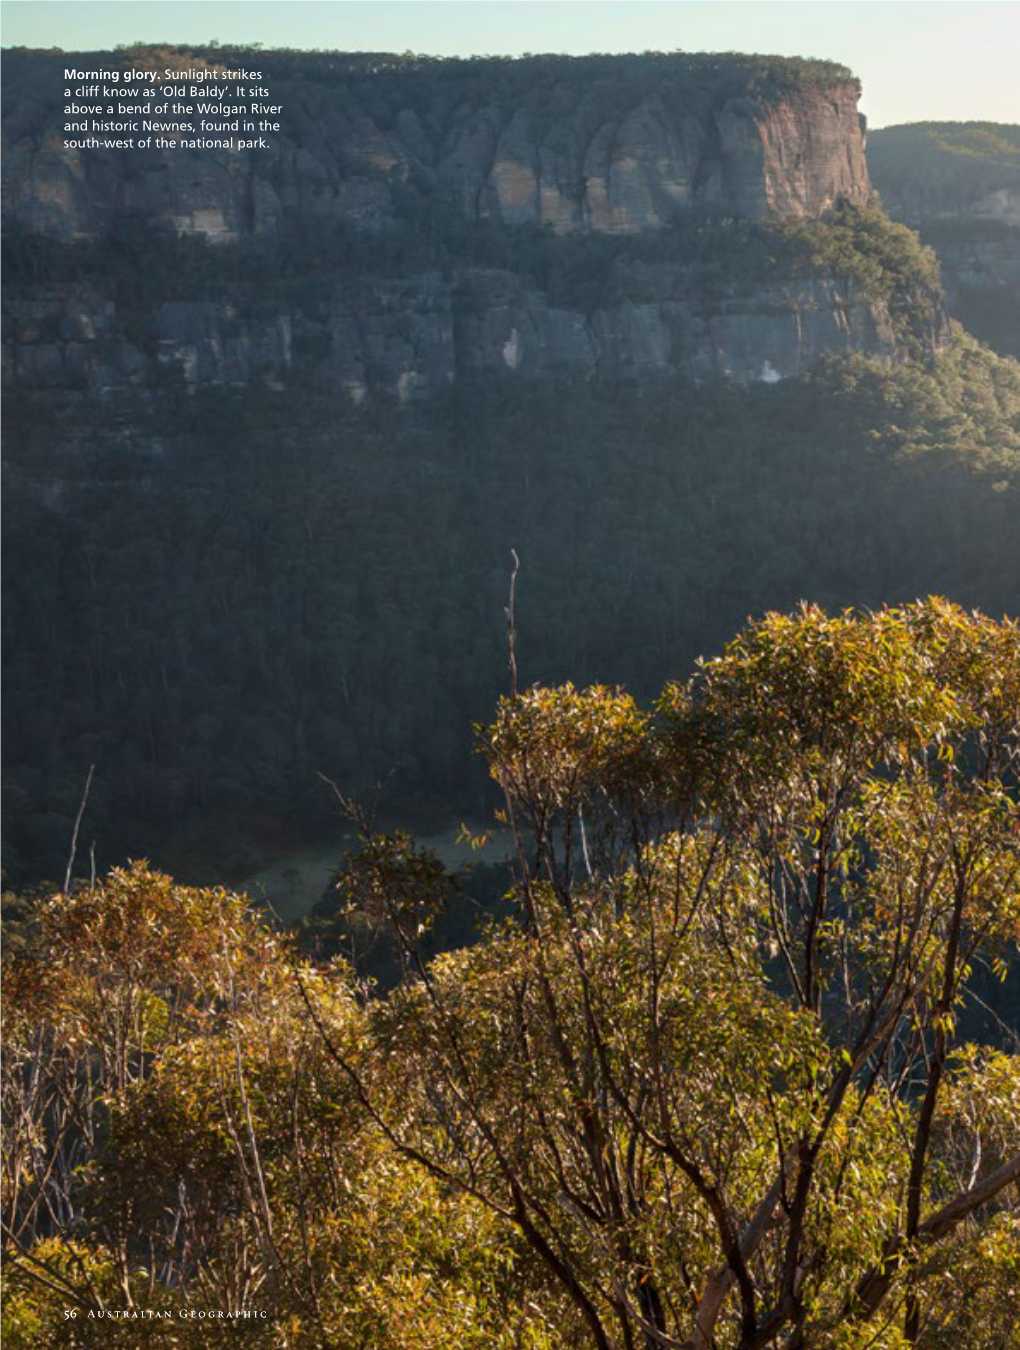 It Sits Above a Bend of the Wolgan River and Historic Newnes, Found in the South-West of the National Park